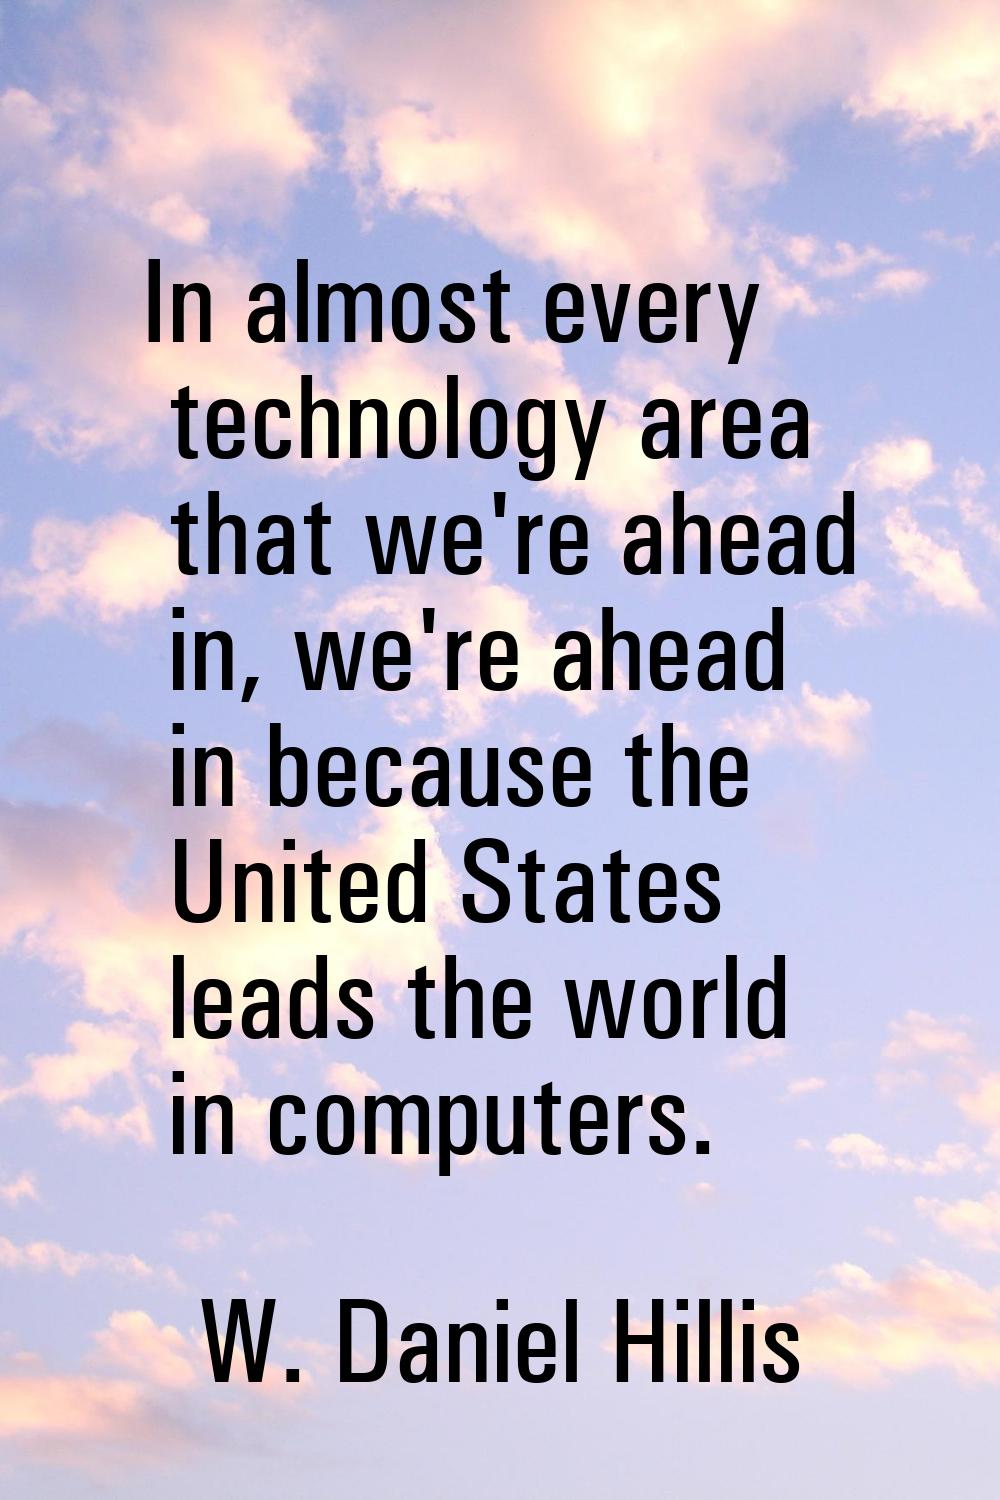 In almost every technology area that we're ahead in, we're ahead in because the United States leads